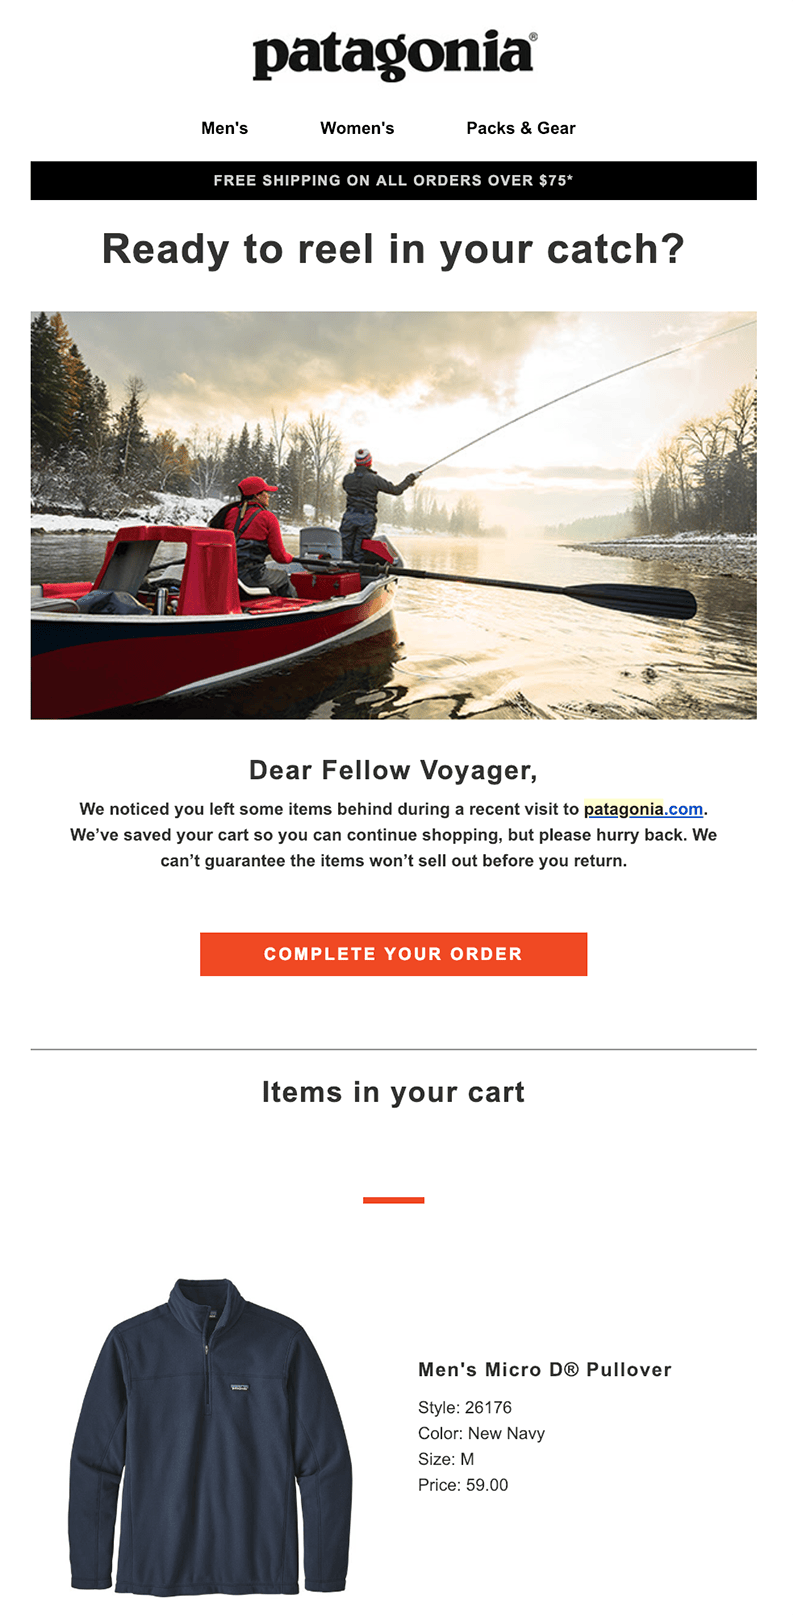 abandoned cart email from Patagonia